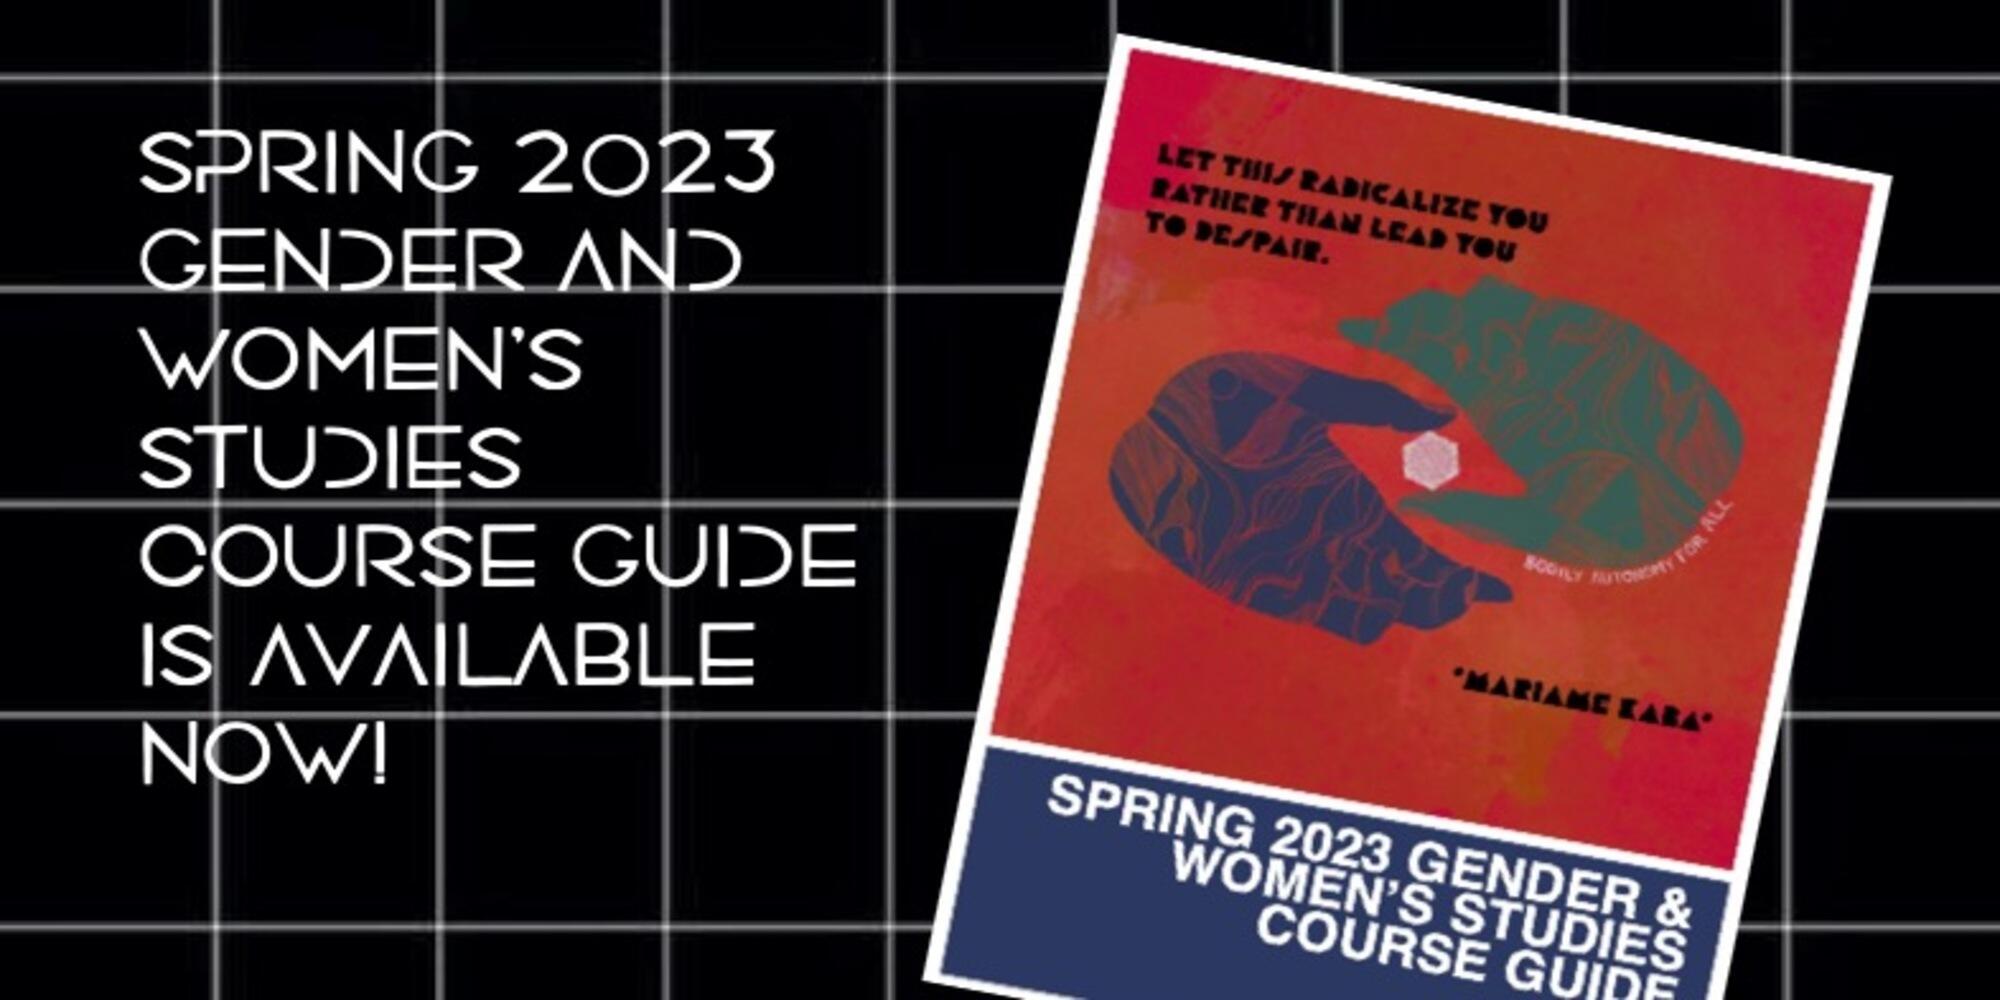 Black grid background with an image of the Spring 2023 Course Guide cover.